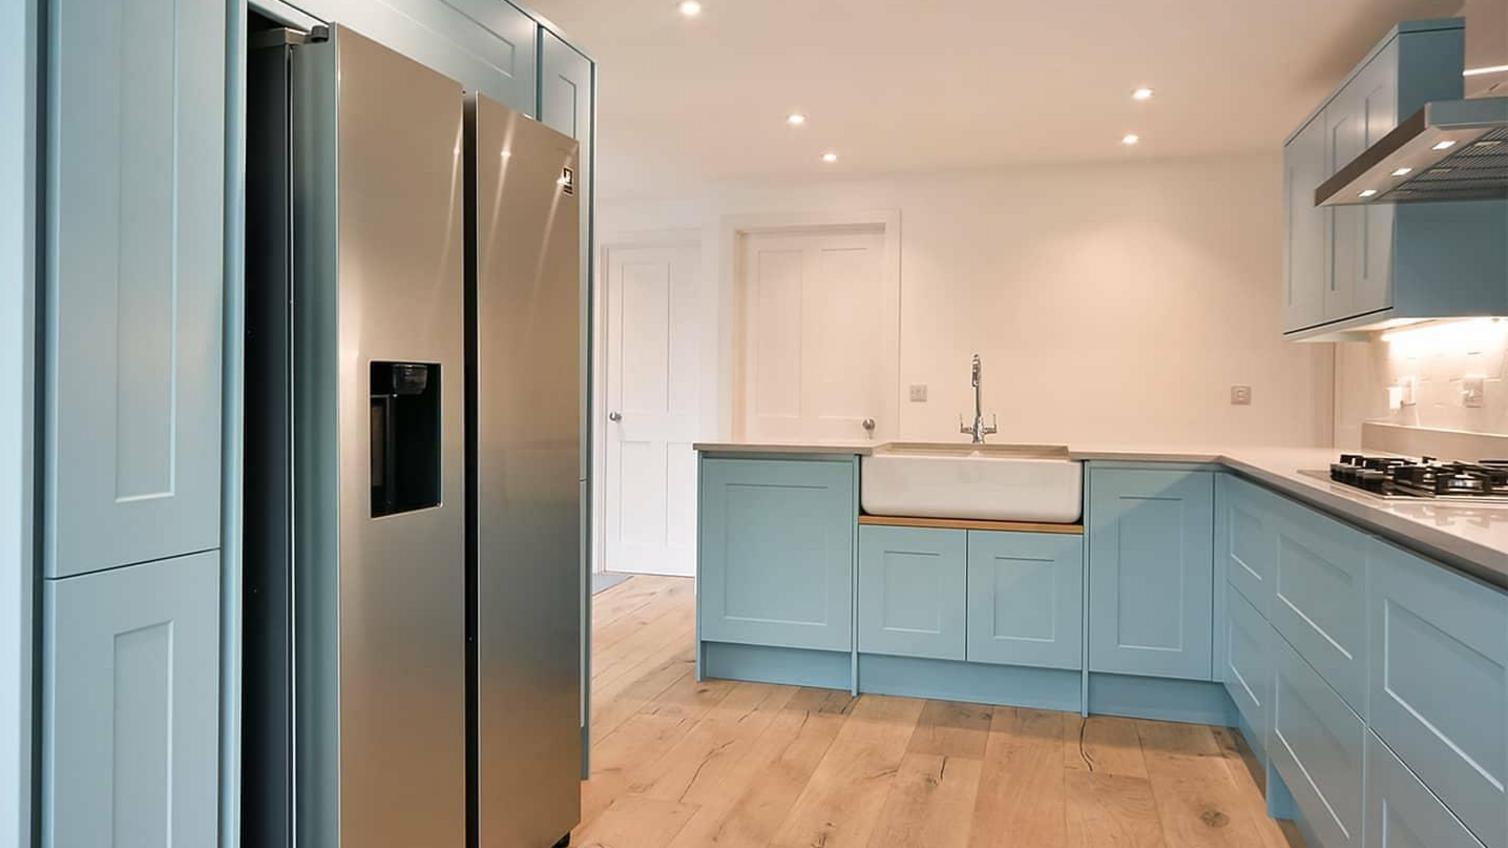 Blue painted kitchen idea using shaker cupboard doors. Includes a Belfast sink and a silver American fridge.